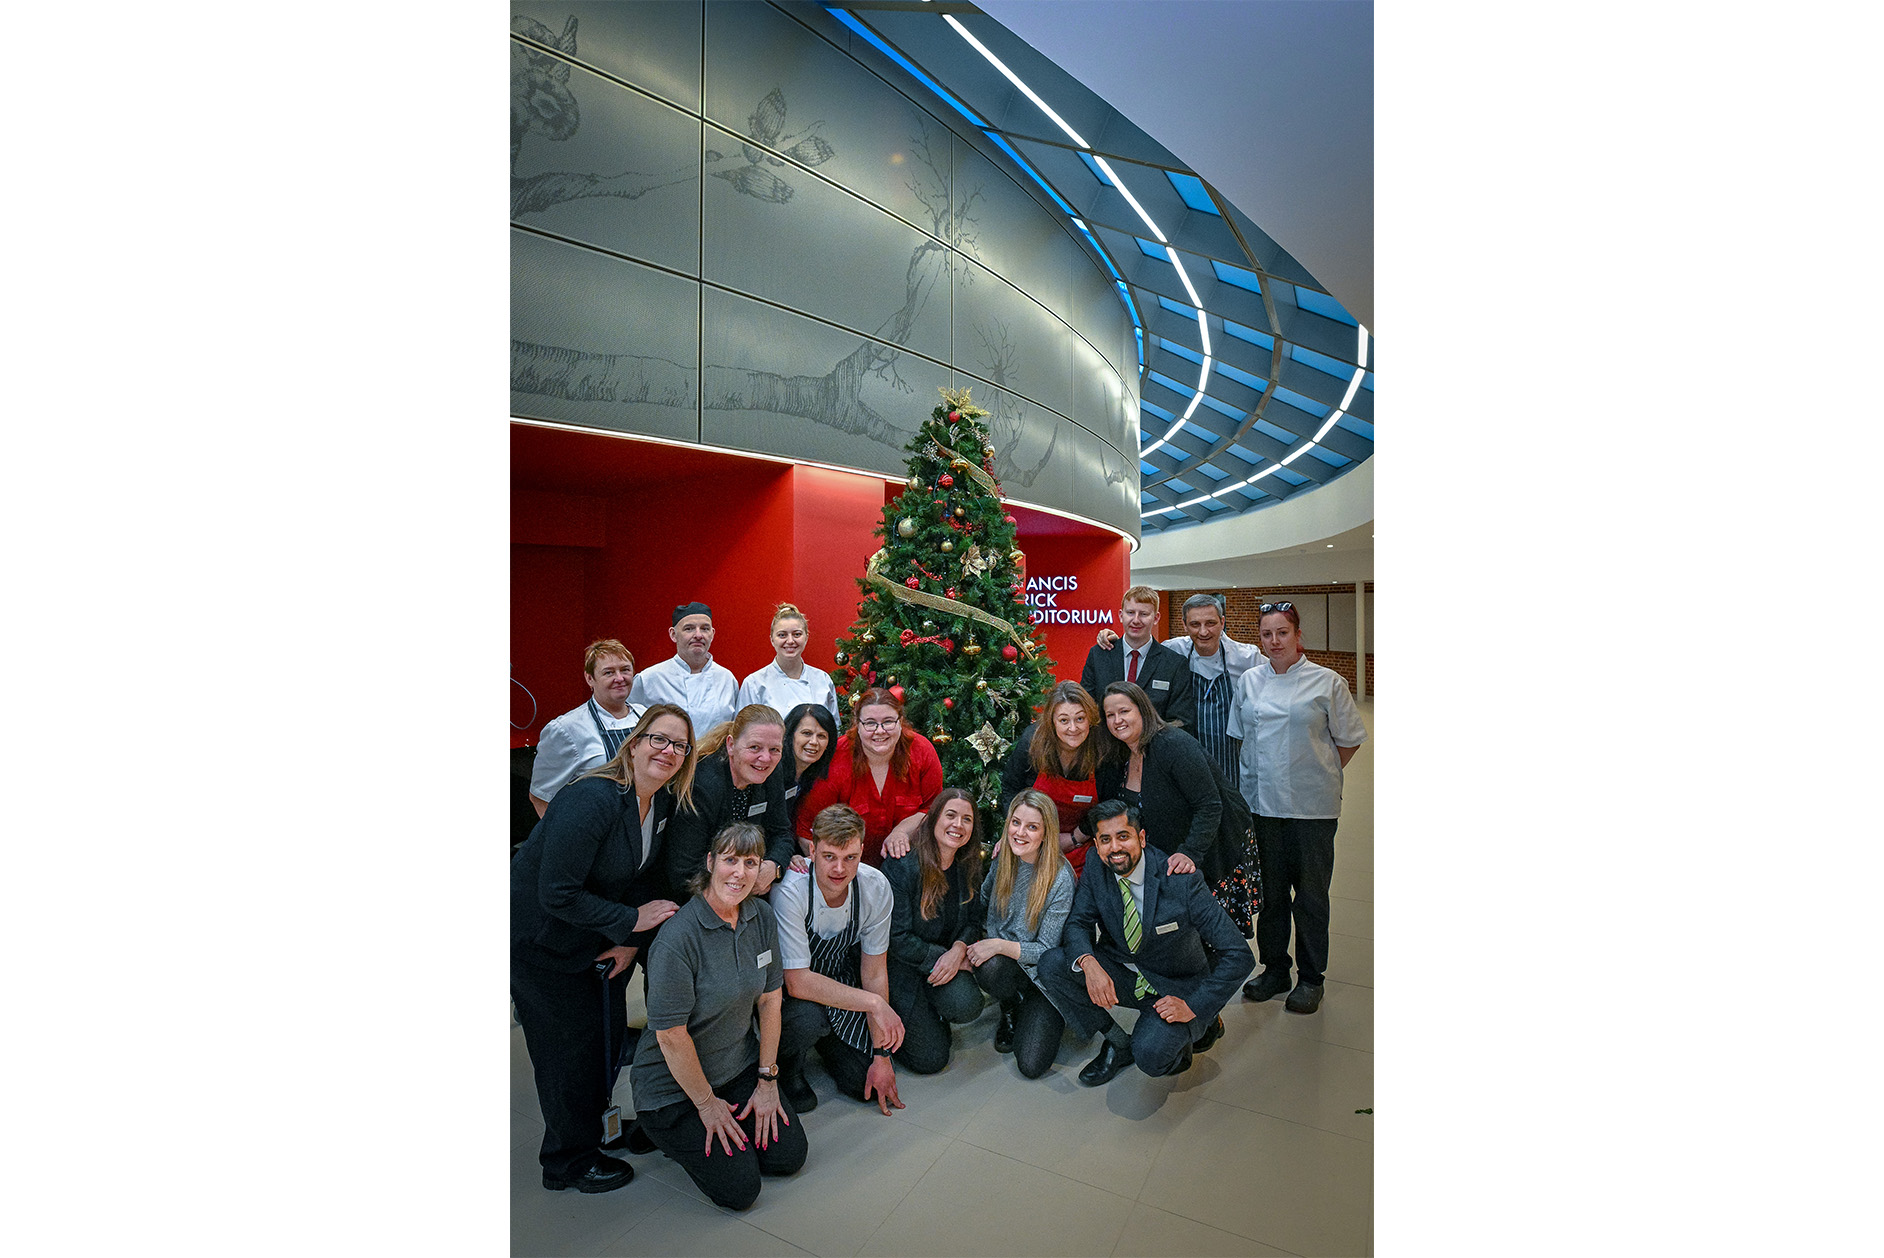 The teams behind the Hinxton Hall Open Afternoon - events and kitchen teams - standing in front of the Christmas tree and the Francis Crick Auditorium